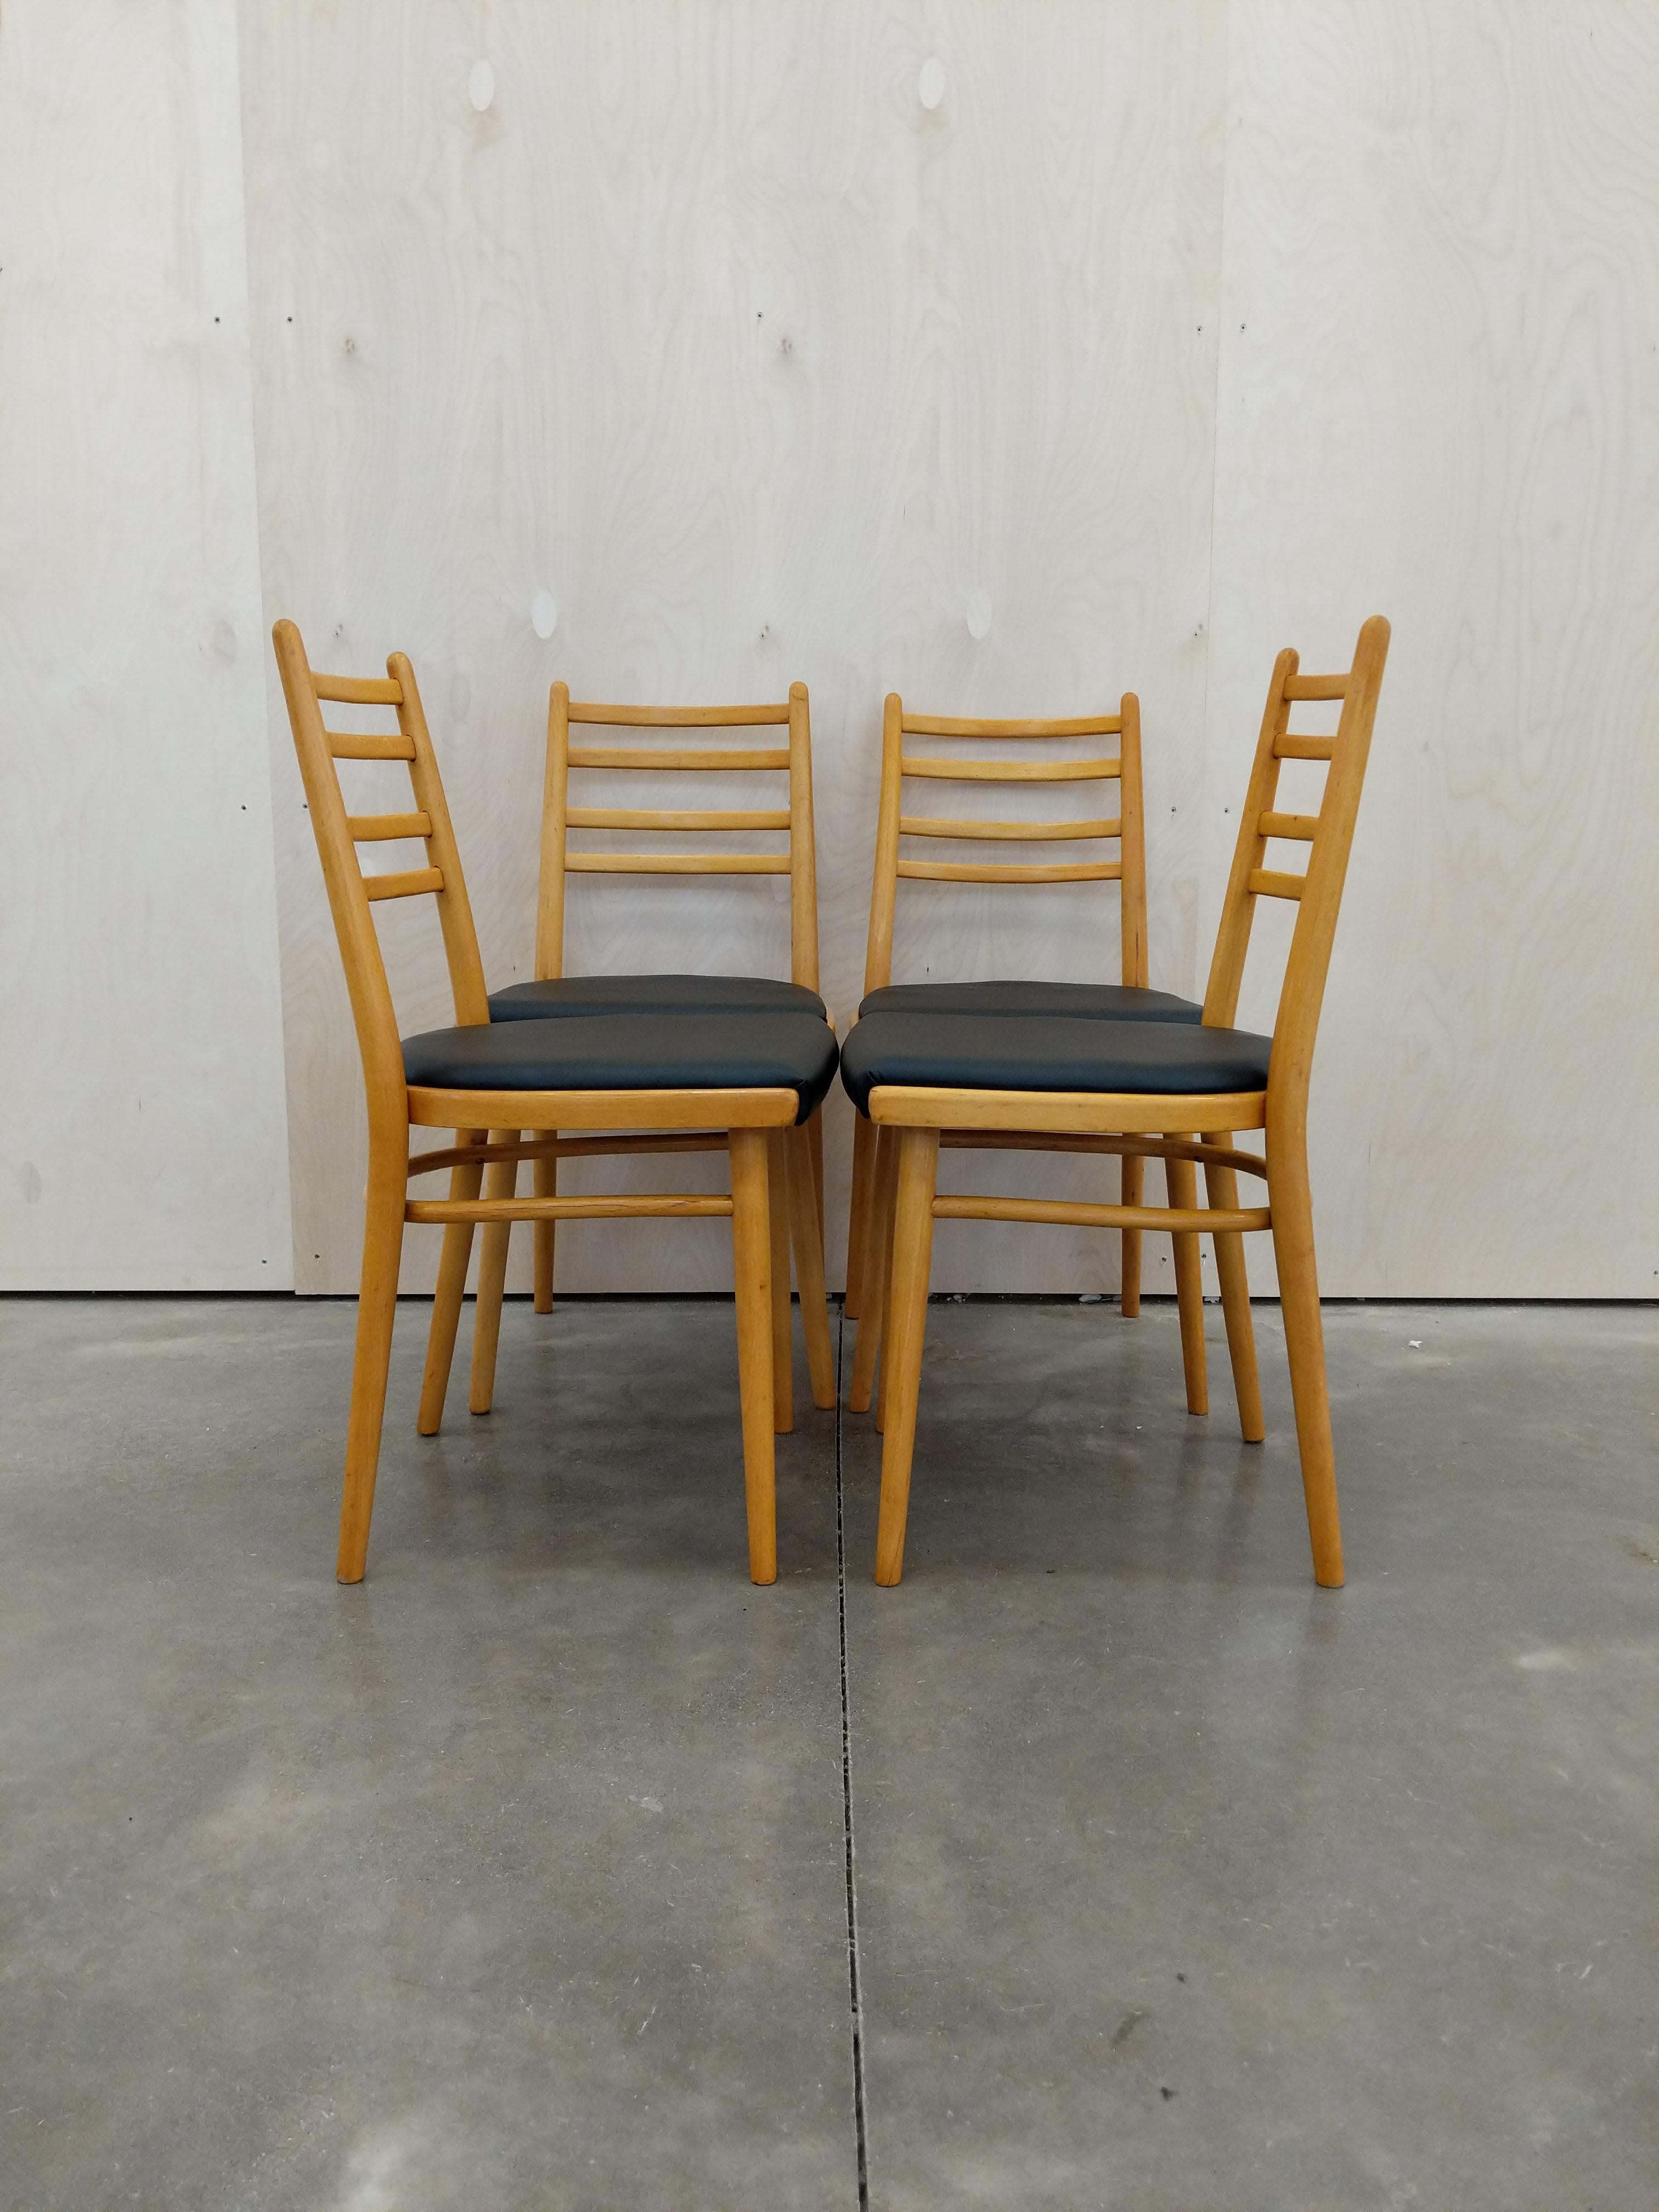 Set of 4 authentic vintage Czech mid century modern dining chairs.

This set is in excellent vintage condition with brand new upholstery (see photos).

If you would like any additional details, please contact us.

Dimensions:
32.5” tall to